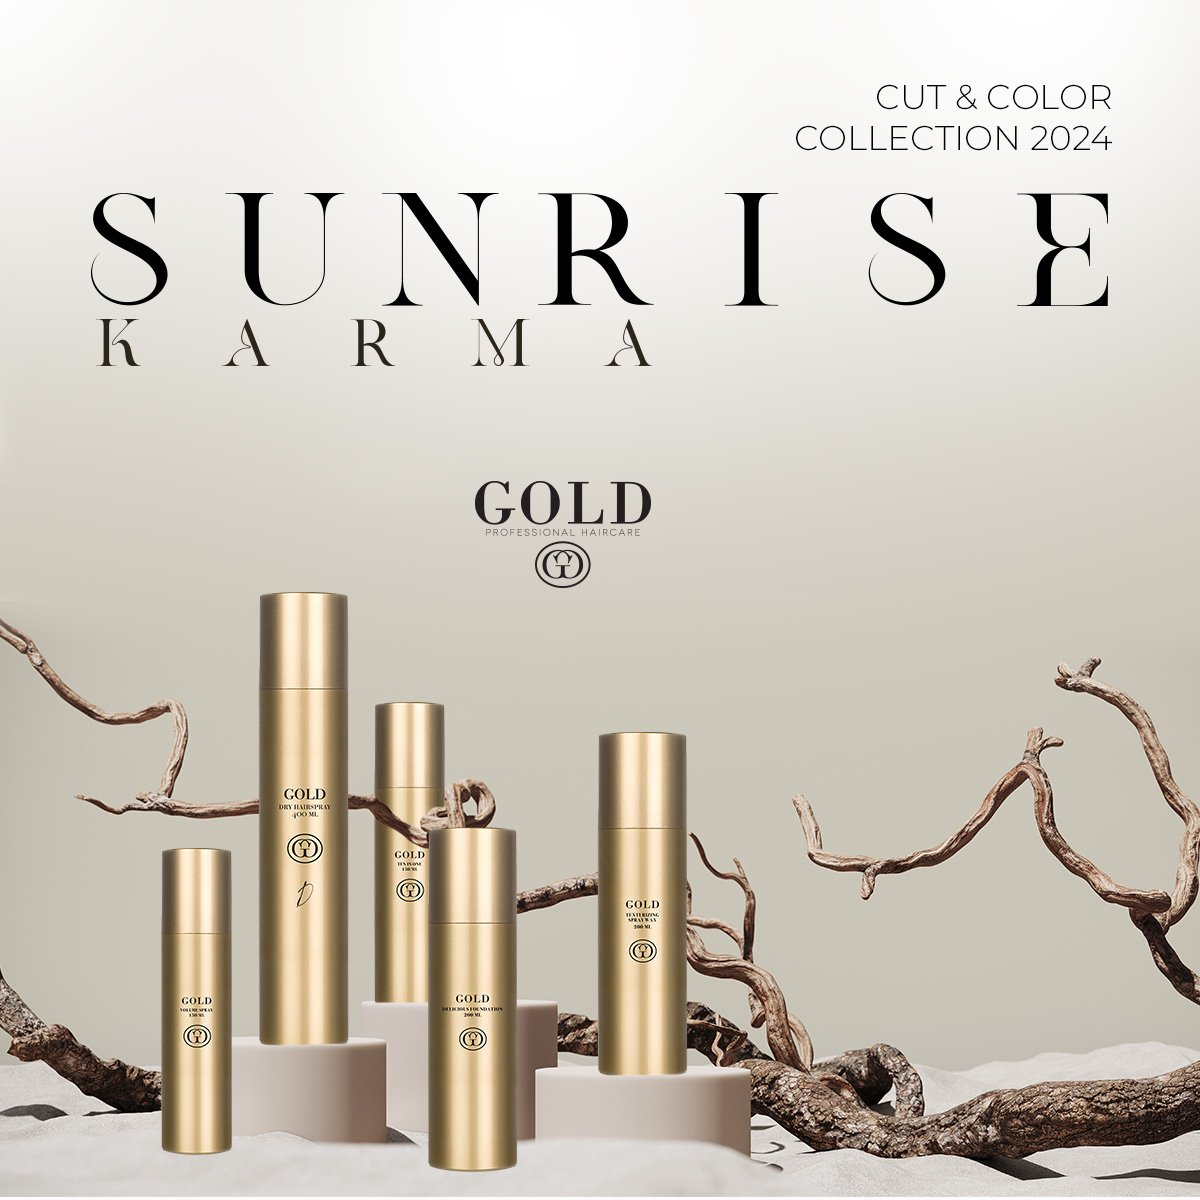 Gold Haircare’s Cut & Color Collection 2024